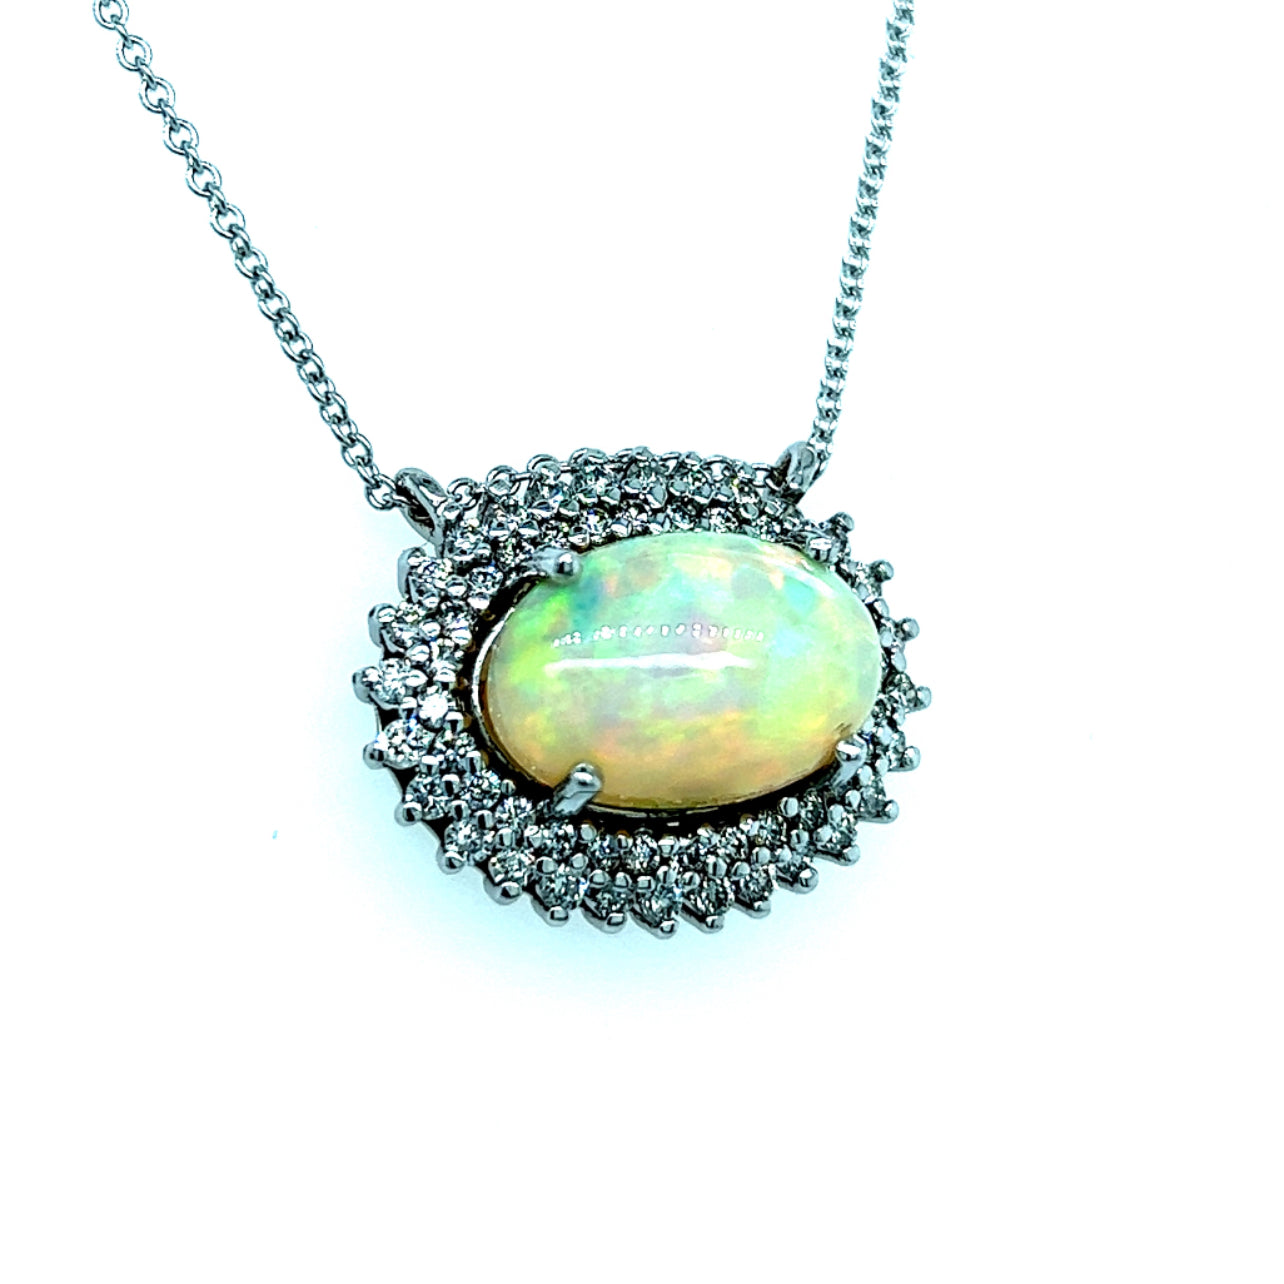 Natural Opal Diamond Pendant Necklace 18" 14k Gold 5.81 TCW Certified $5,950 301789 - Certified Fine Jewelry